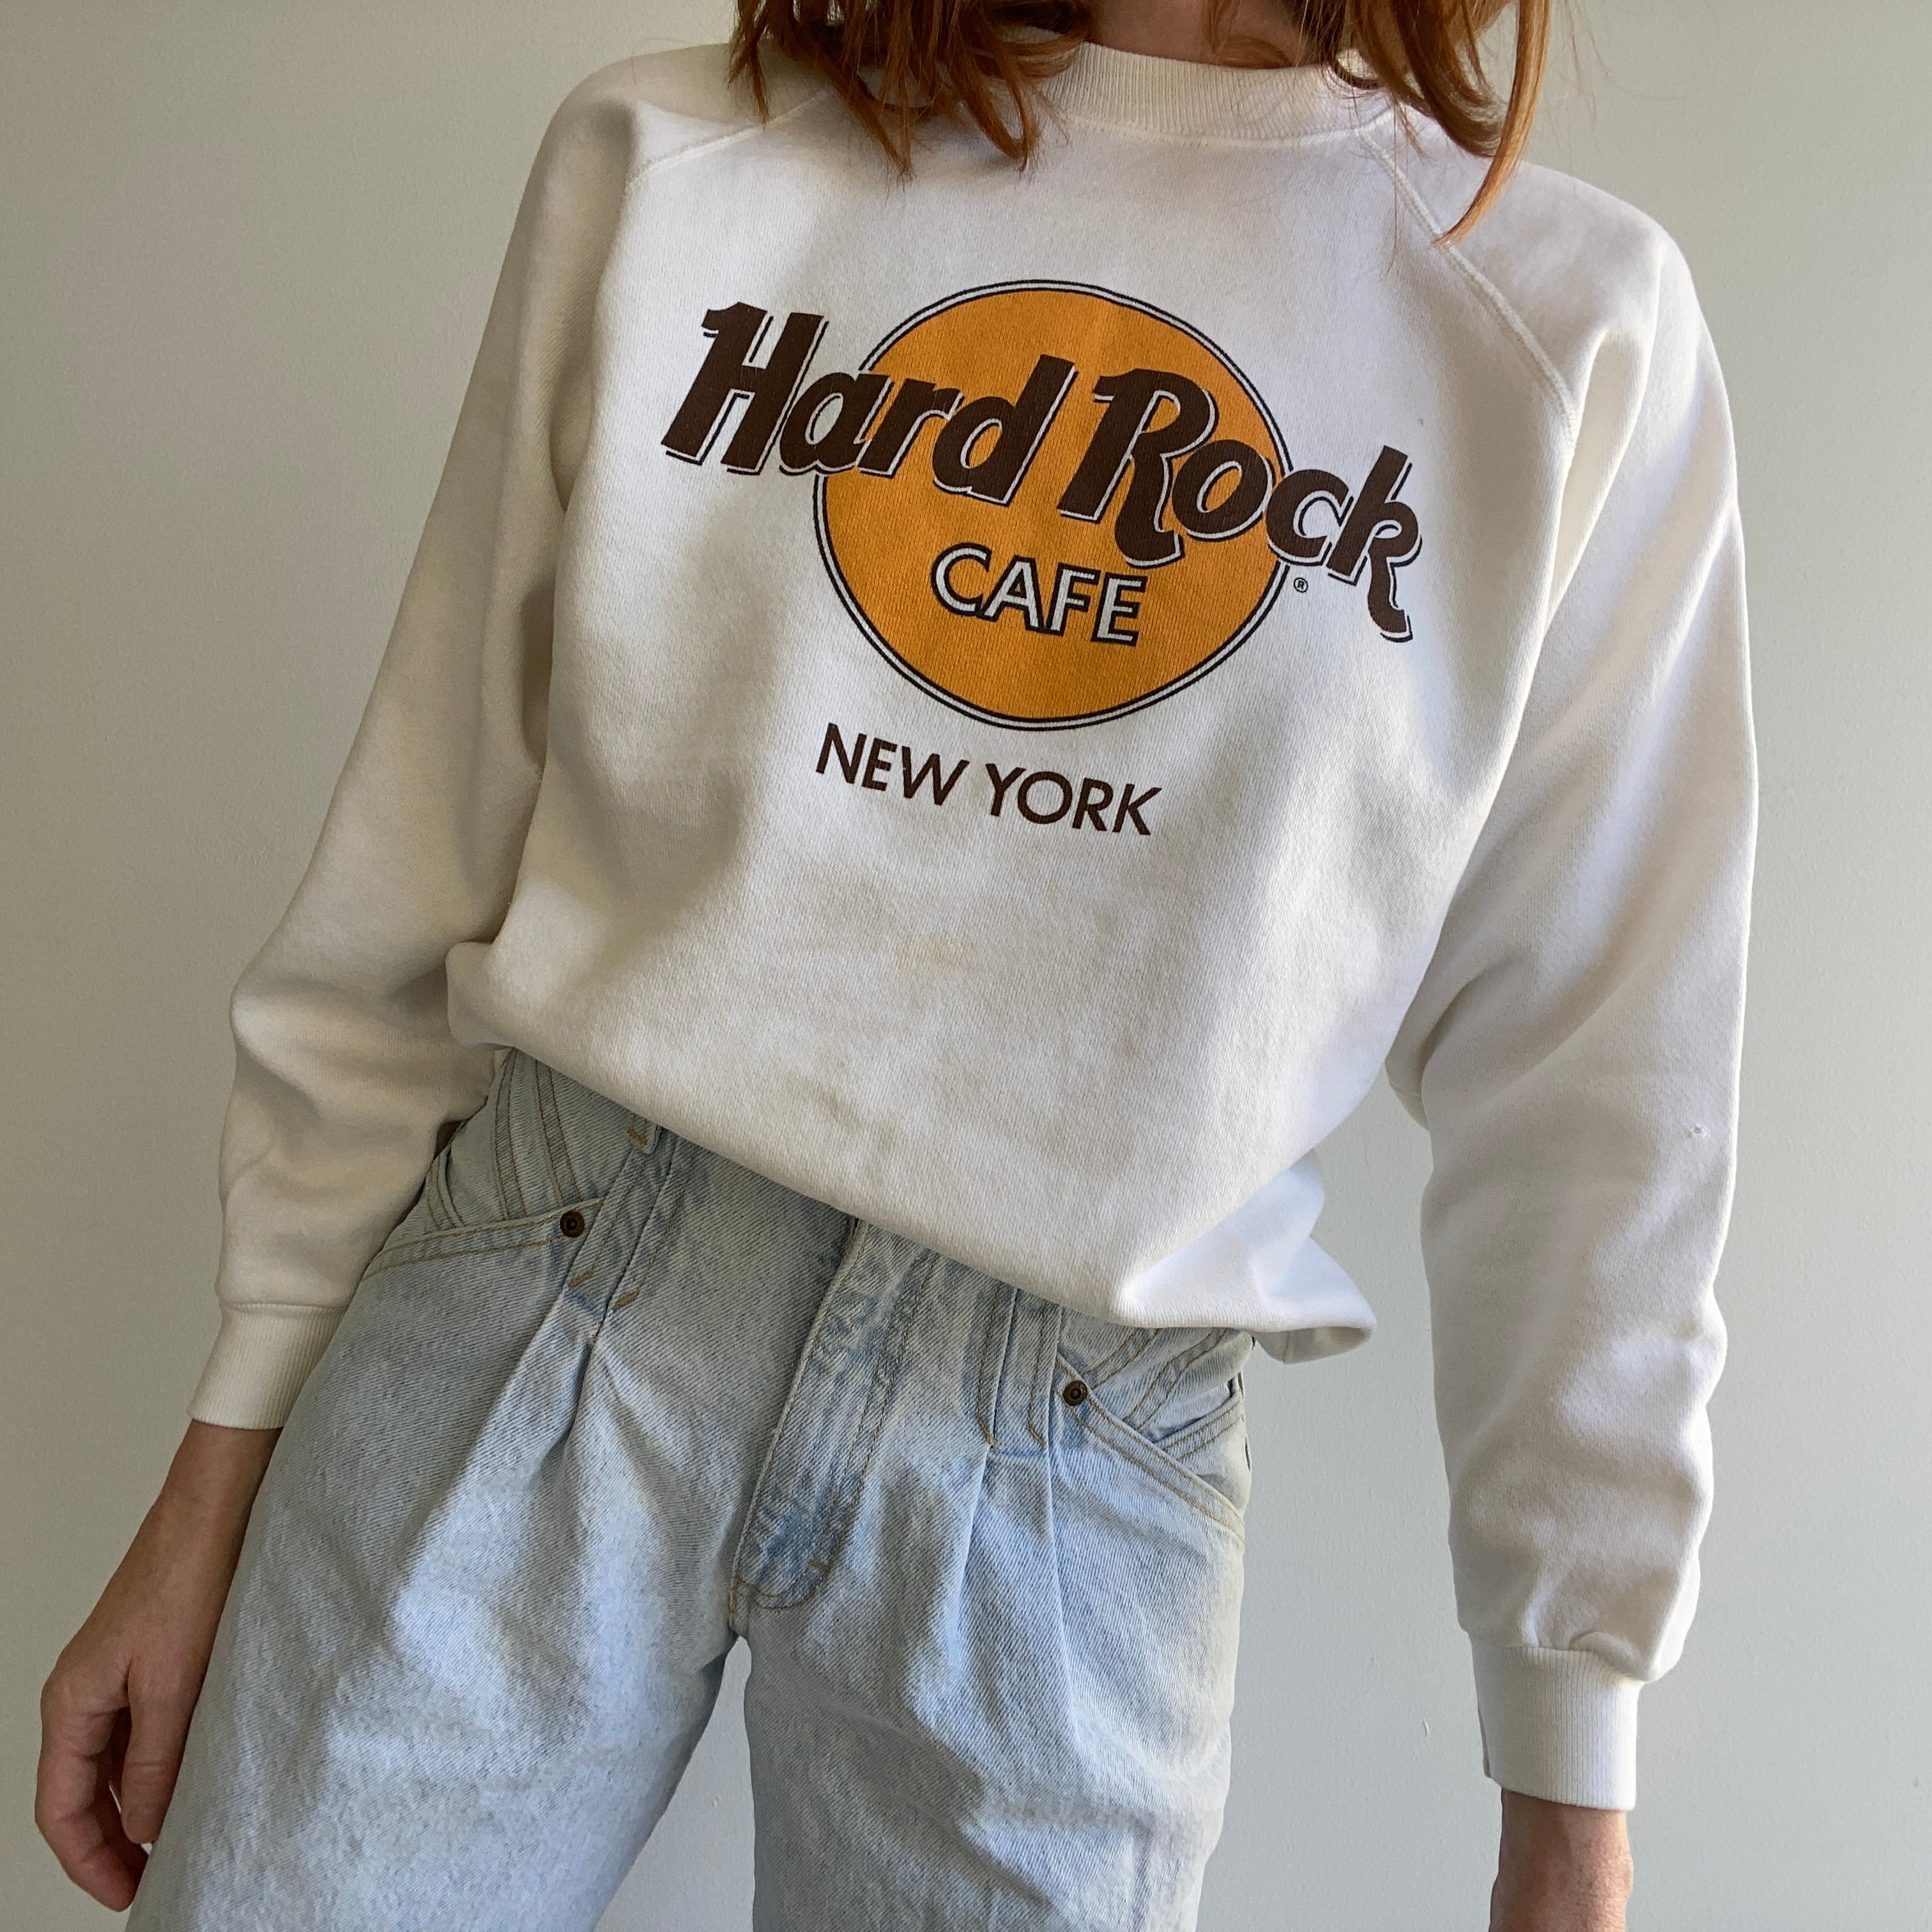 Verblinding Zeehaven vorm 1990s Hard Rock Cafe - New York - Sweatshirt with Stains and Holes – Red  Vintage Co